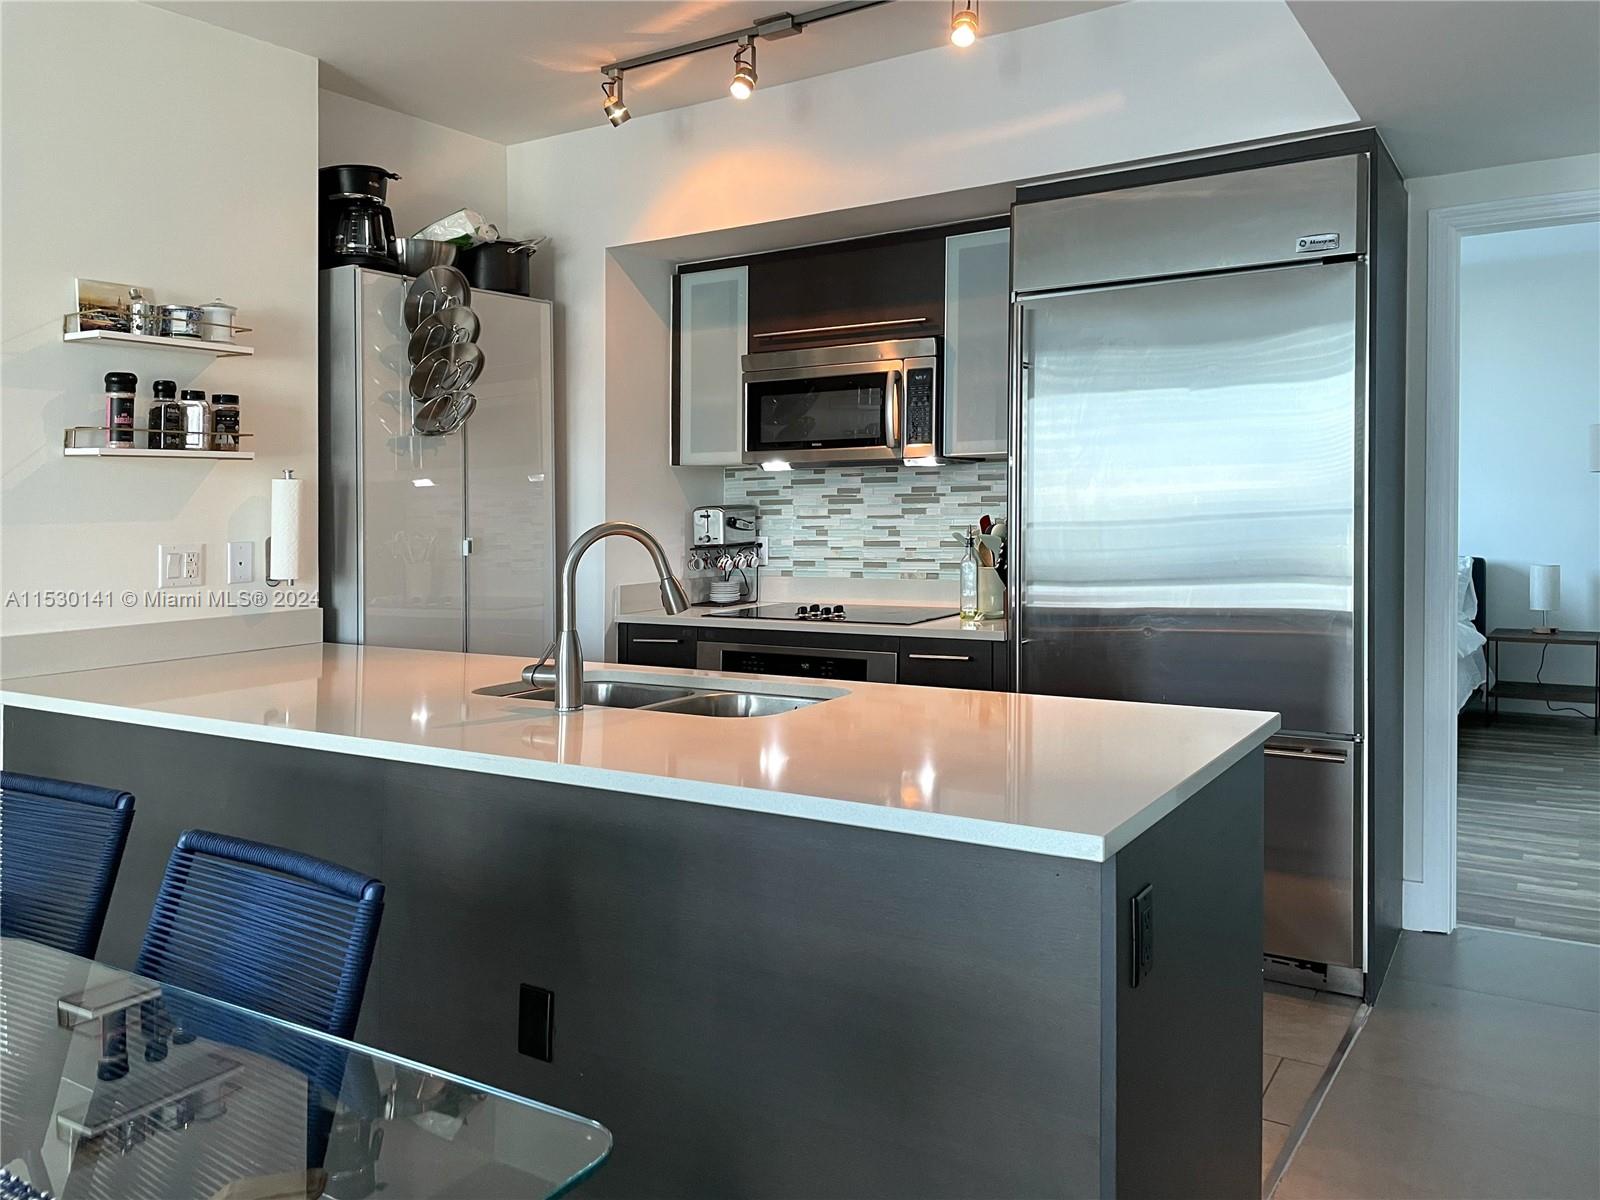 Discover the epitome of urban living in Unit 1407 at 500 Brickell. This meticulously renovated 2-bed, 2-bath condo on the 14th floor offers convenience, comfort, and style. Freshly painted and fully furnished in 2023, it features hardwood and tile floors, stainless steel appliances, and a brand-new HVAC system. Enjoy safety and serenity with hurricane-proof, soundproof windows. Plus, a washer and dryer are included for added convenience. Near Brickell City Center, dining, transit, and major roads, with a garage spot included. Available from May 1, 2024, to October 31, 2024, with electricity, Wi-Fi, and cable included. Experience Brickell's finest living in 500 Brickell Unit 1407.